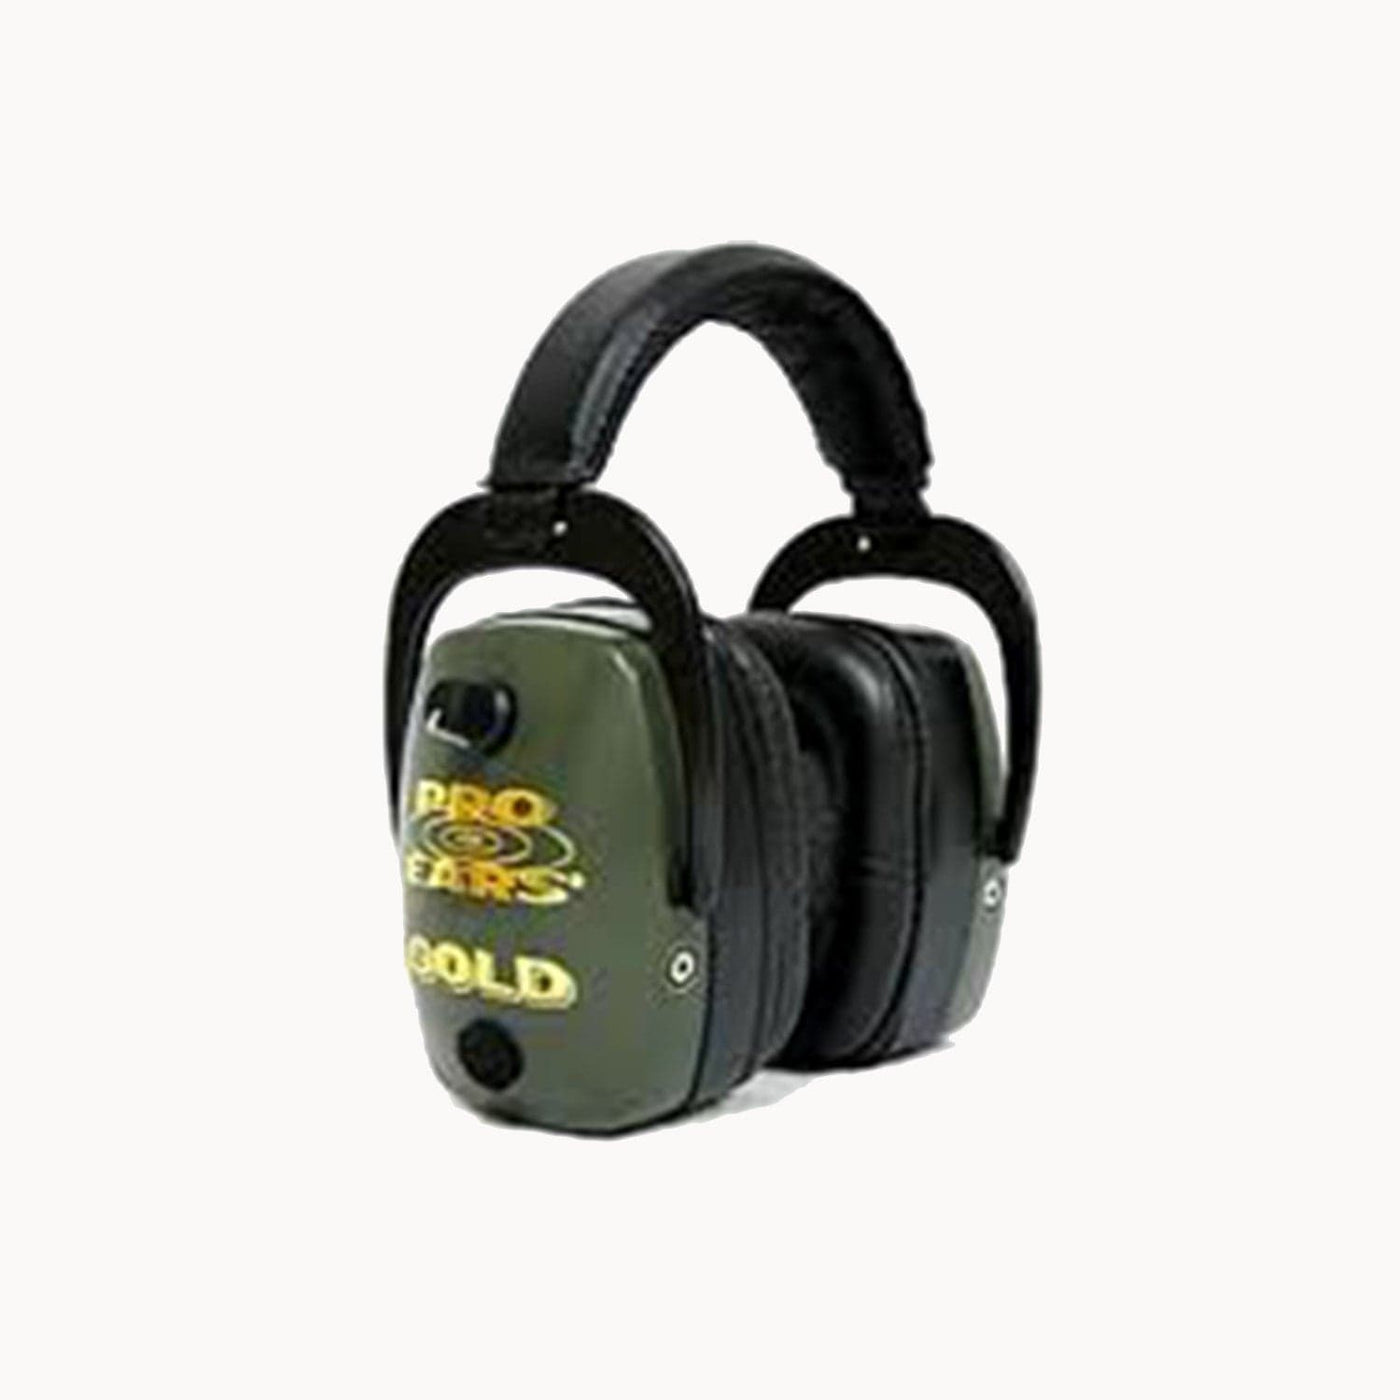 Pro Ears Pro Ears Pro Mag Gold Series Ear Muffs Shooting